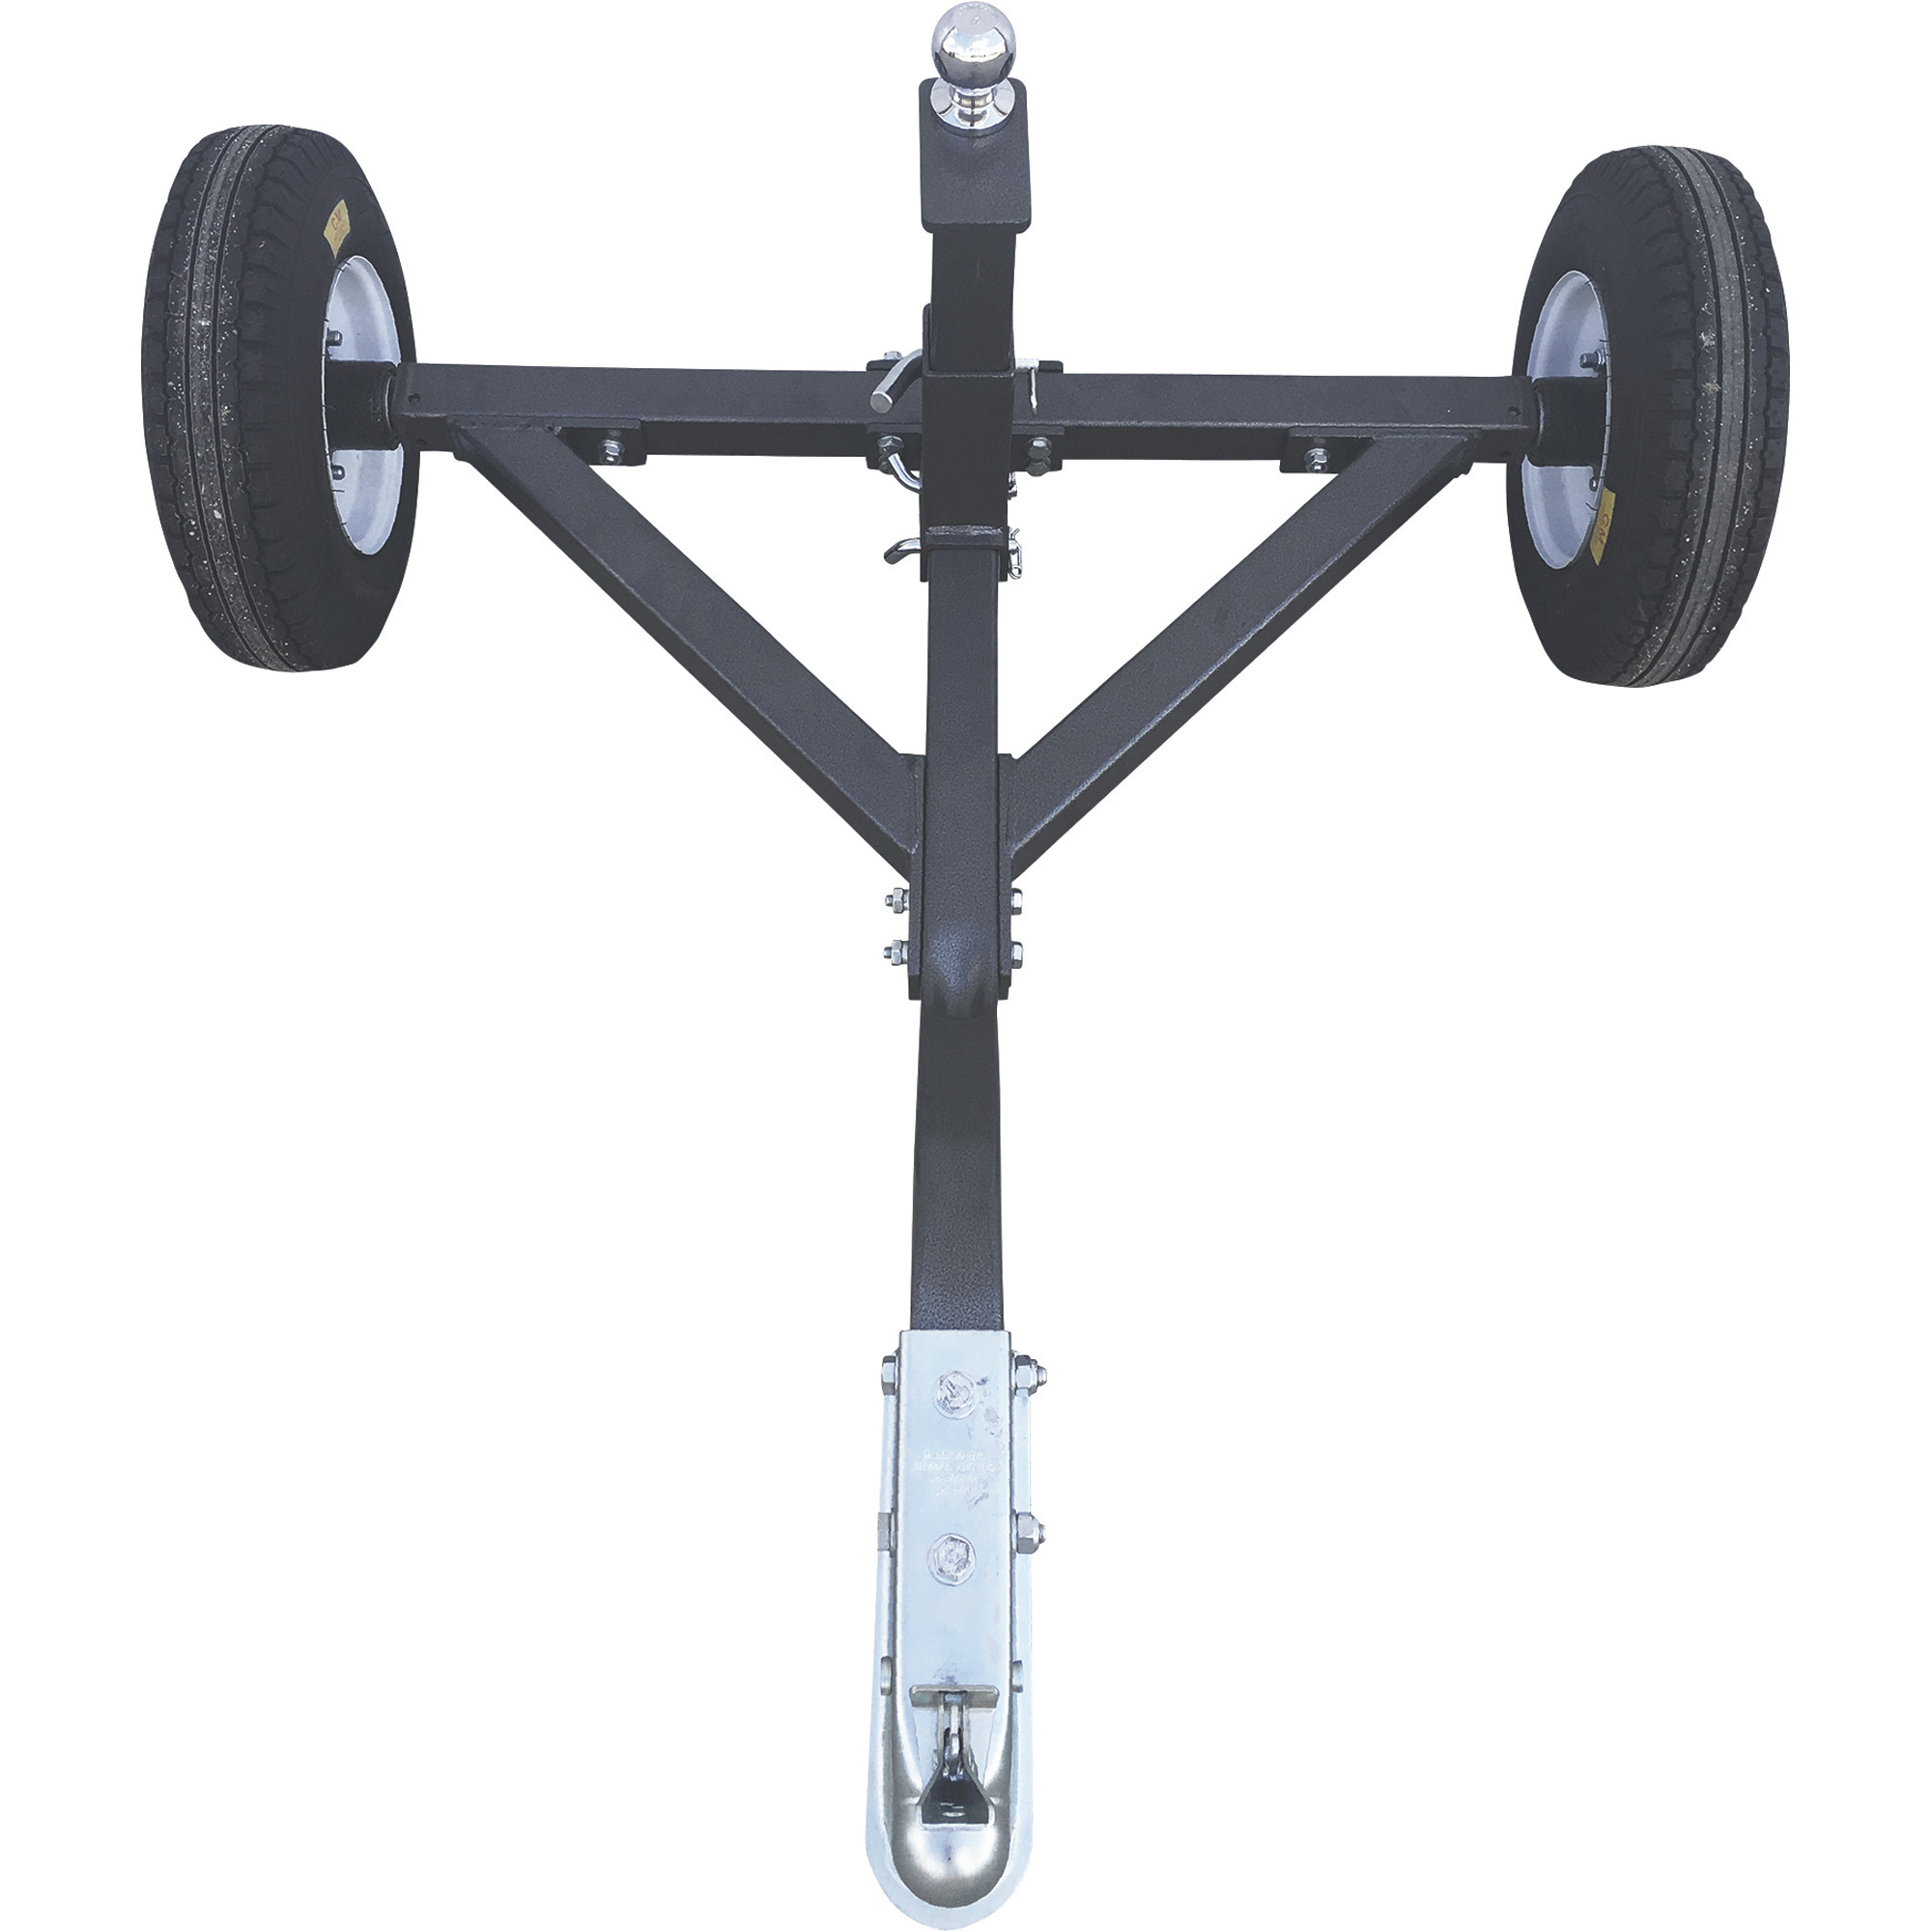 Tow-Tuff ATV Weight Distribution Dolly â 1,000-Lb. Capacity, Model TMD-1000ATV